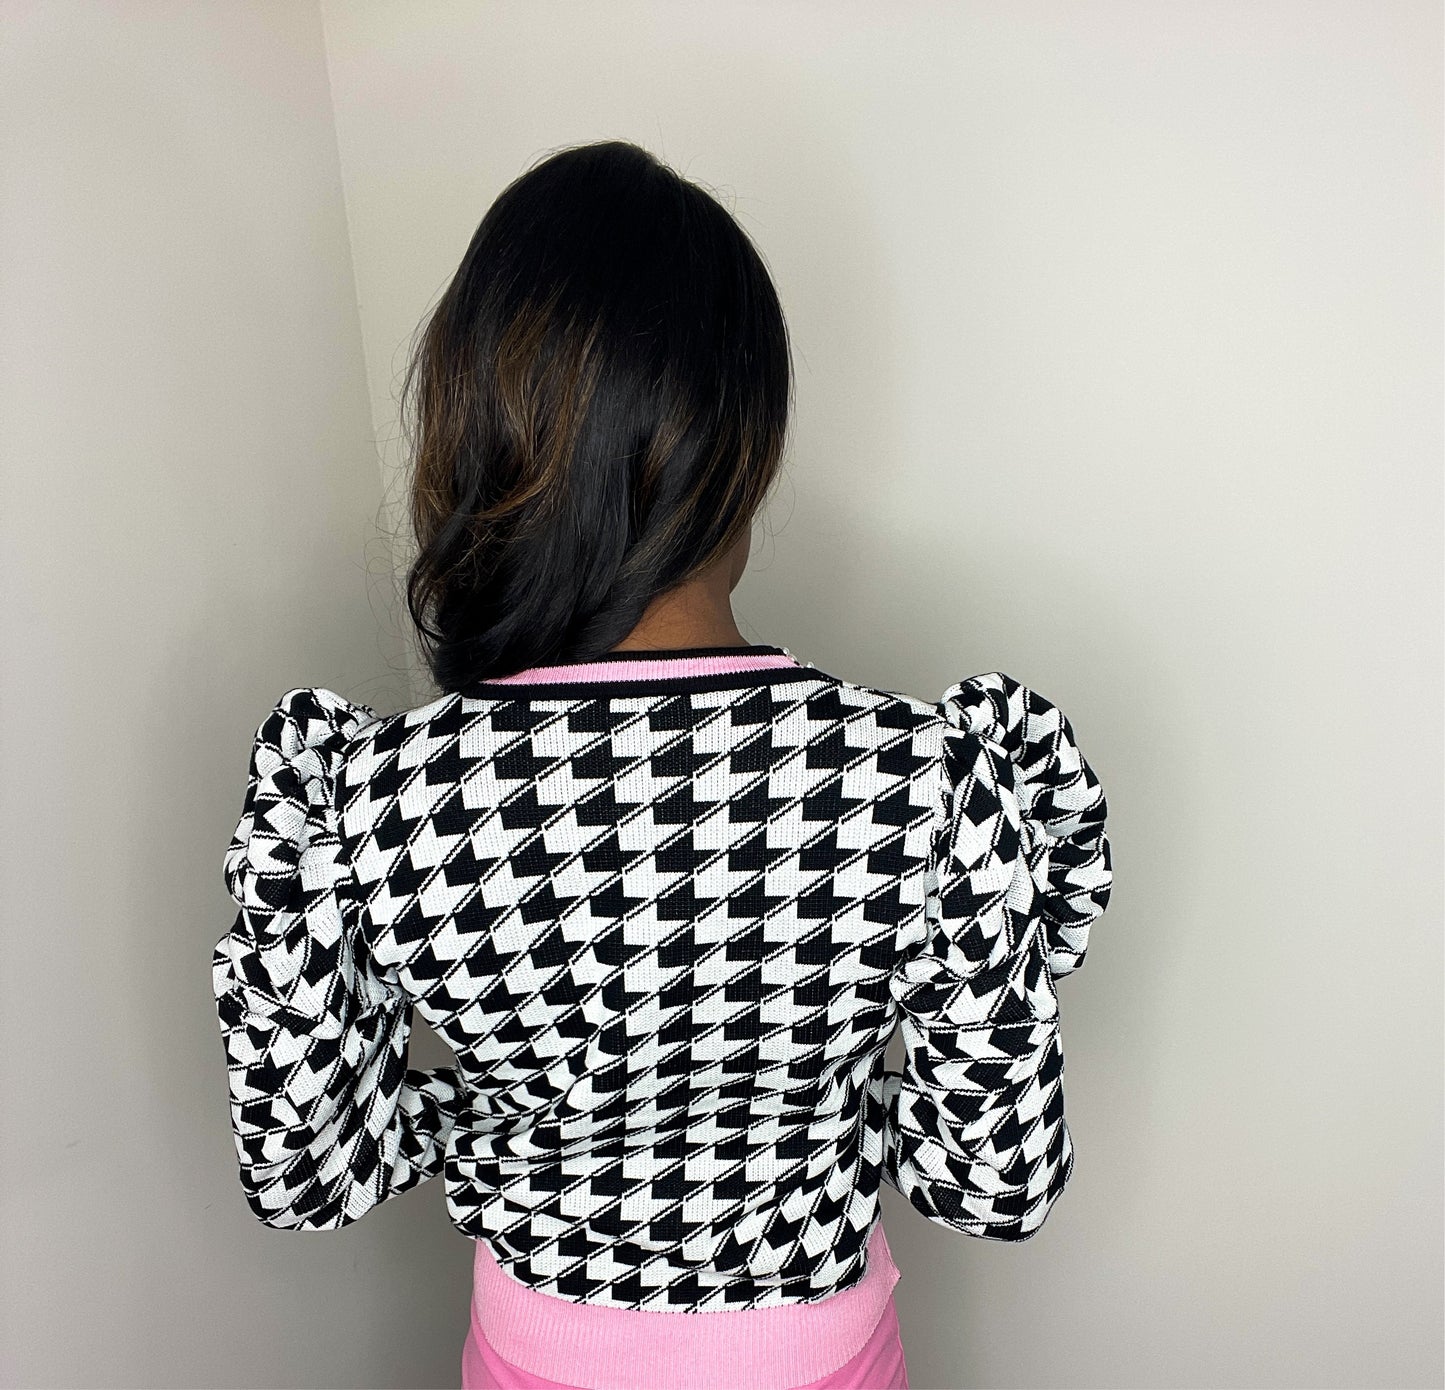 Forever Galore classy houndstooth puff sleeve sweater with pearls AKA with fashion work pants for church or work